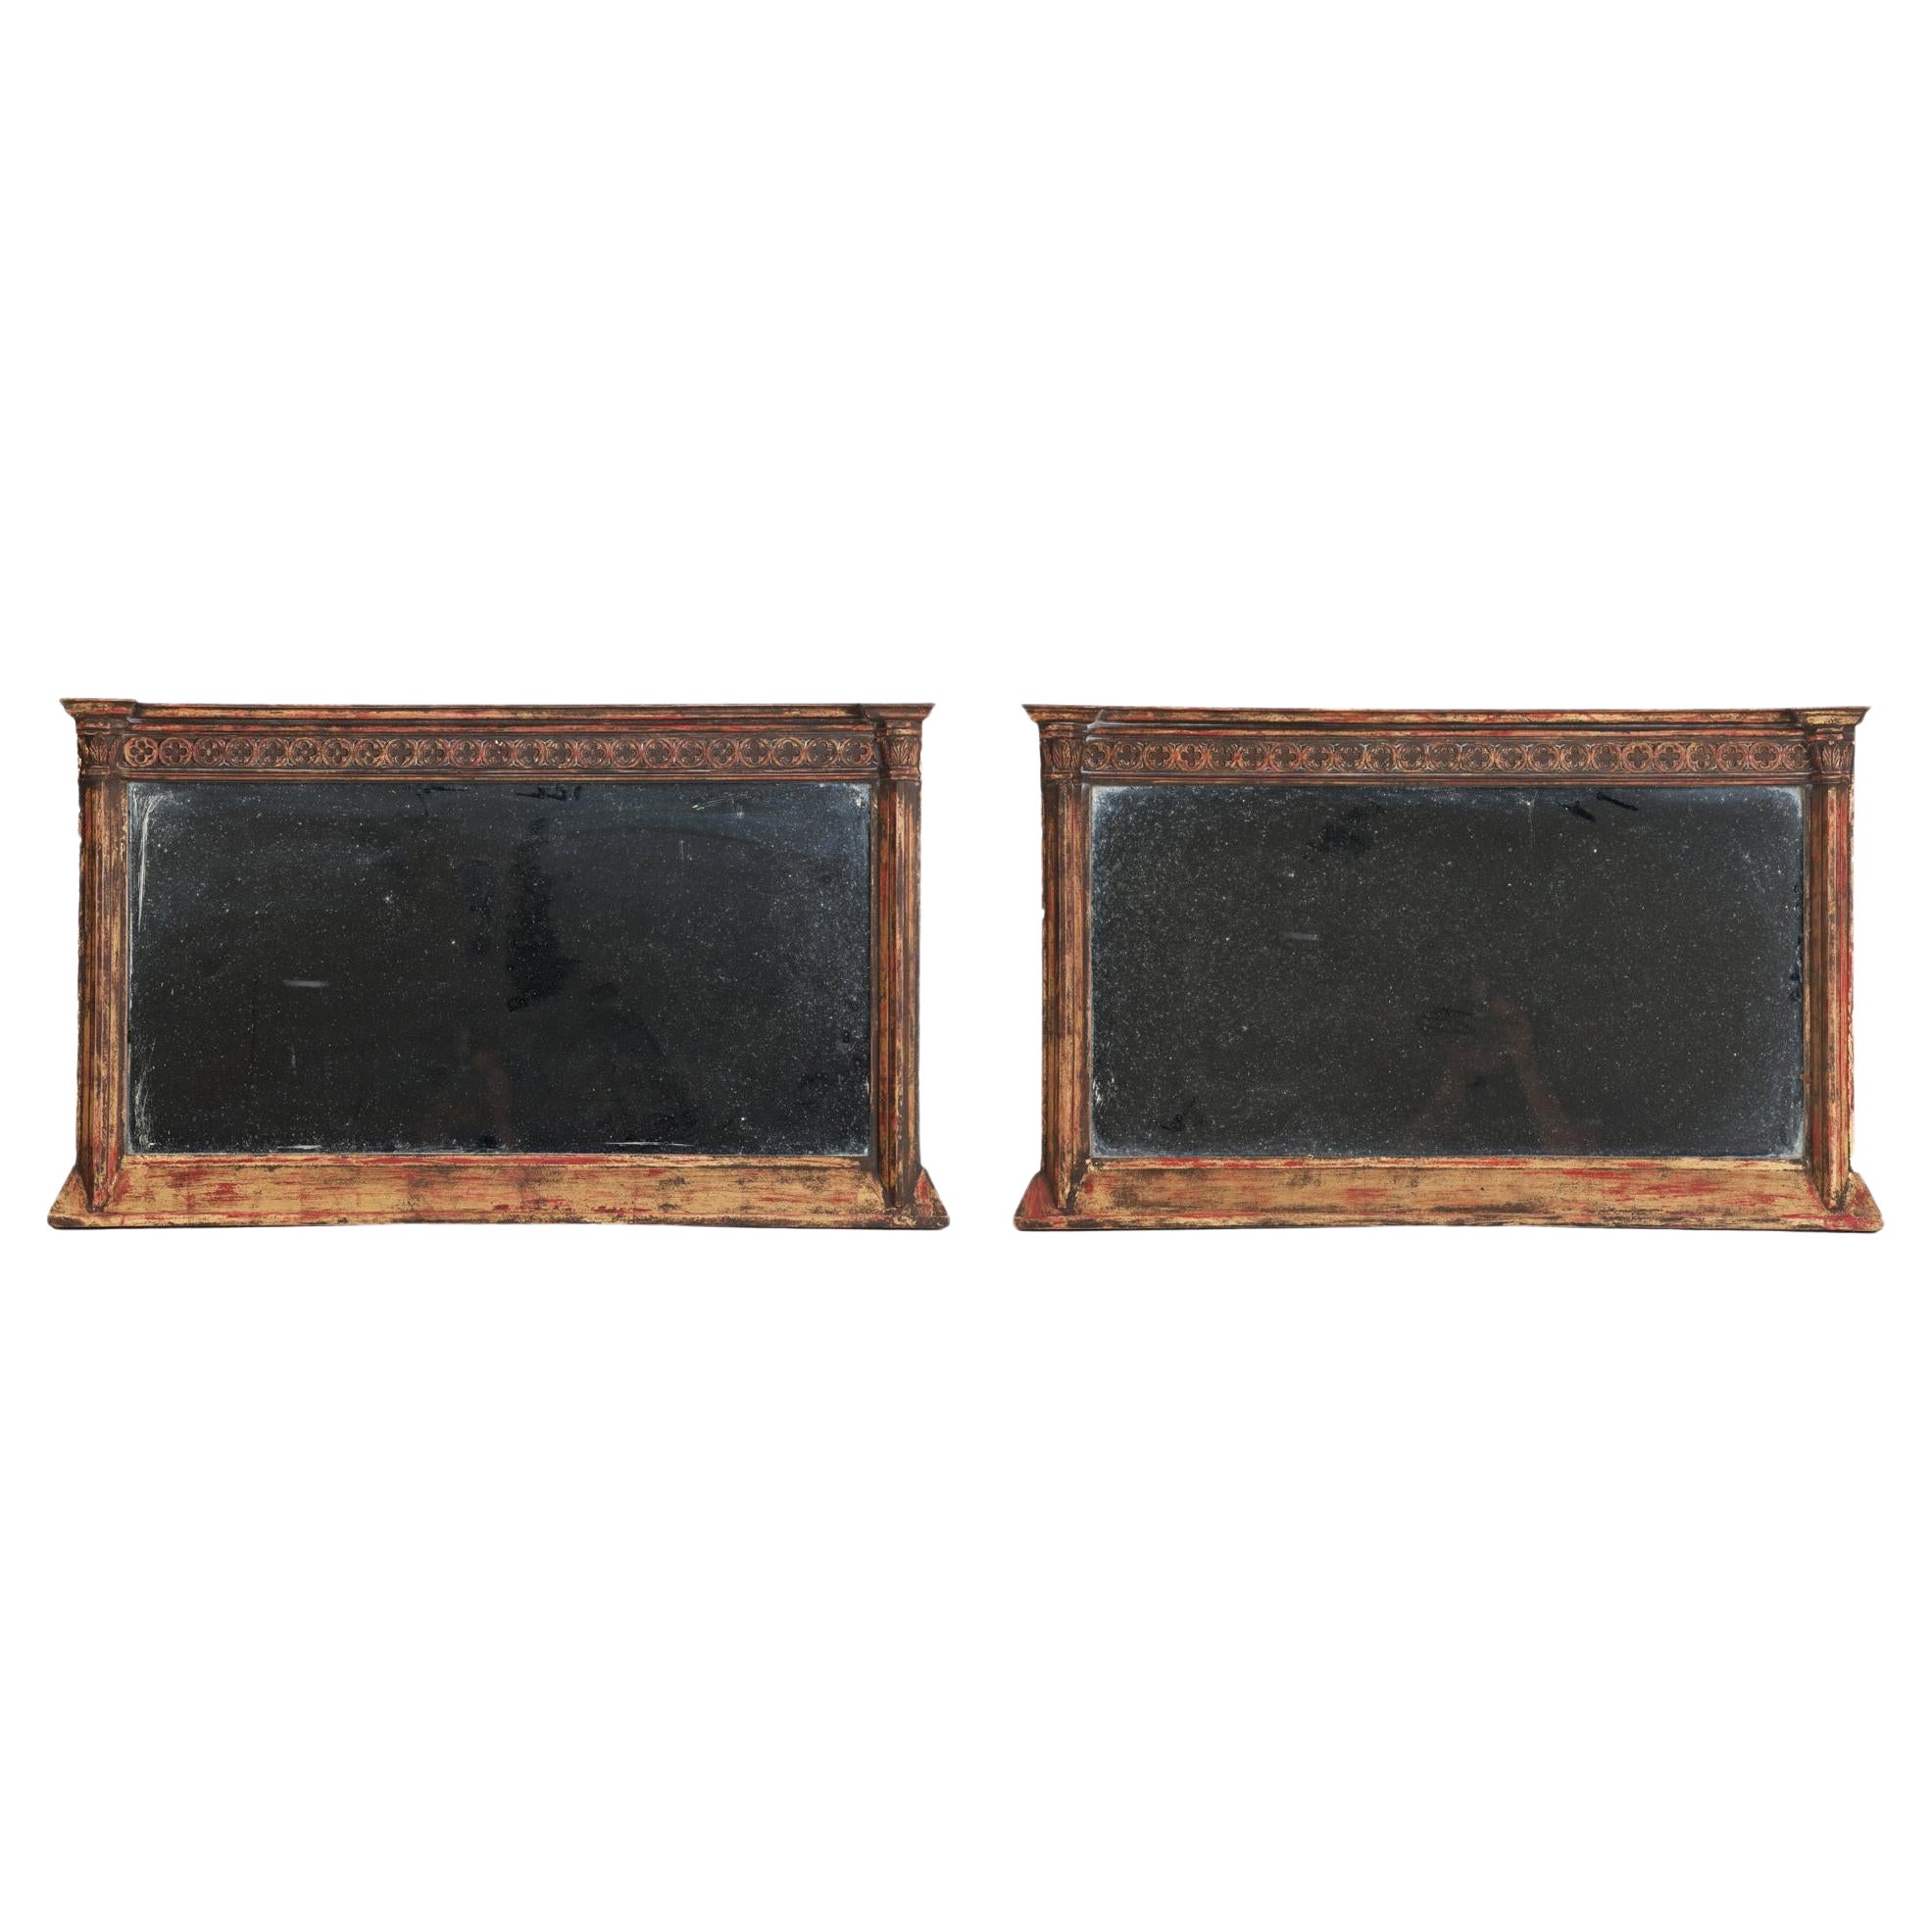 Pair of Neoclassical Style Carved Wood Trumeau, Nineteenth Century